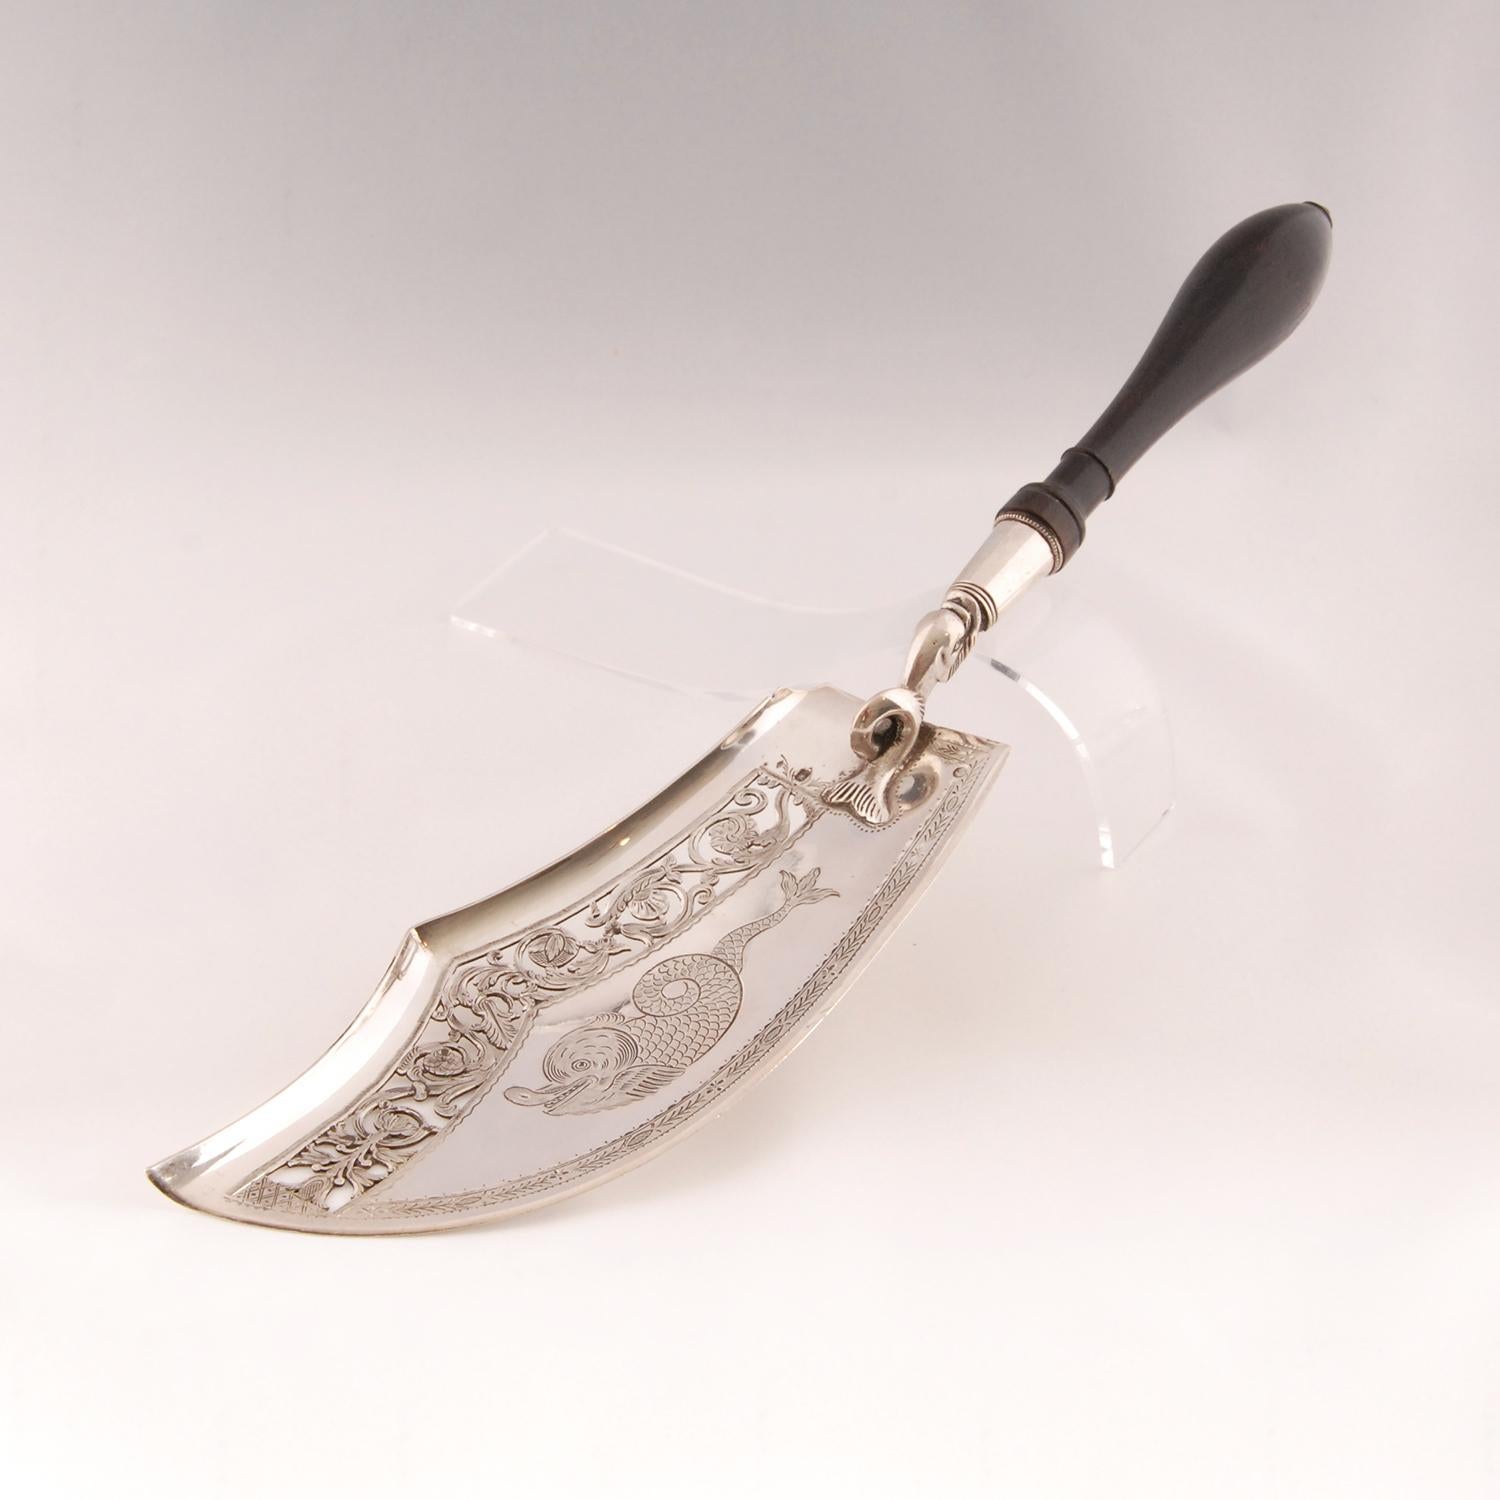 French sterling silver Fish slice
Finely pierced flowers, engraved dolphin and an ebonized handle
Handle with a dolphin entwined.
Origin France first quarter 19th century, Paris
Fully hallmarked


Length: 13.8in - 35cm
Width 3.4in -